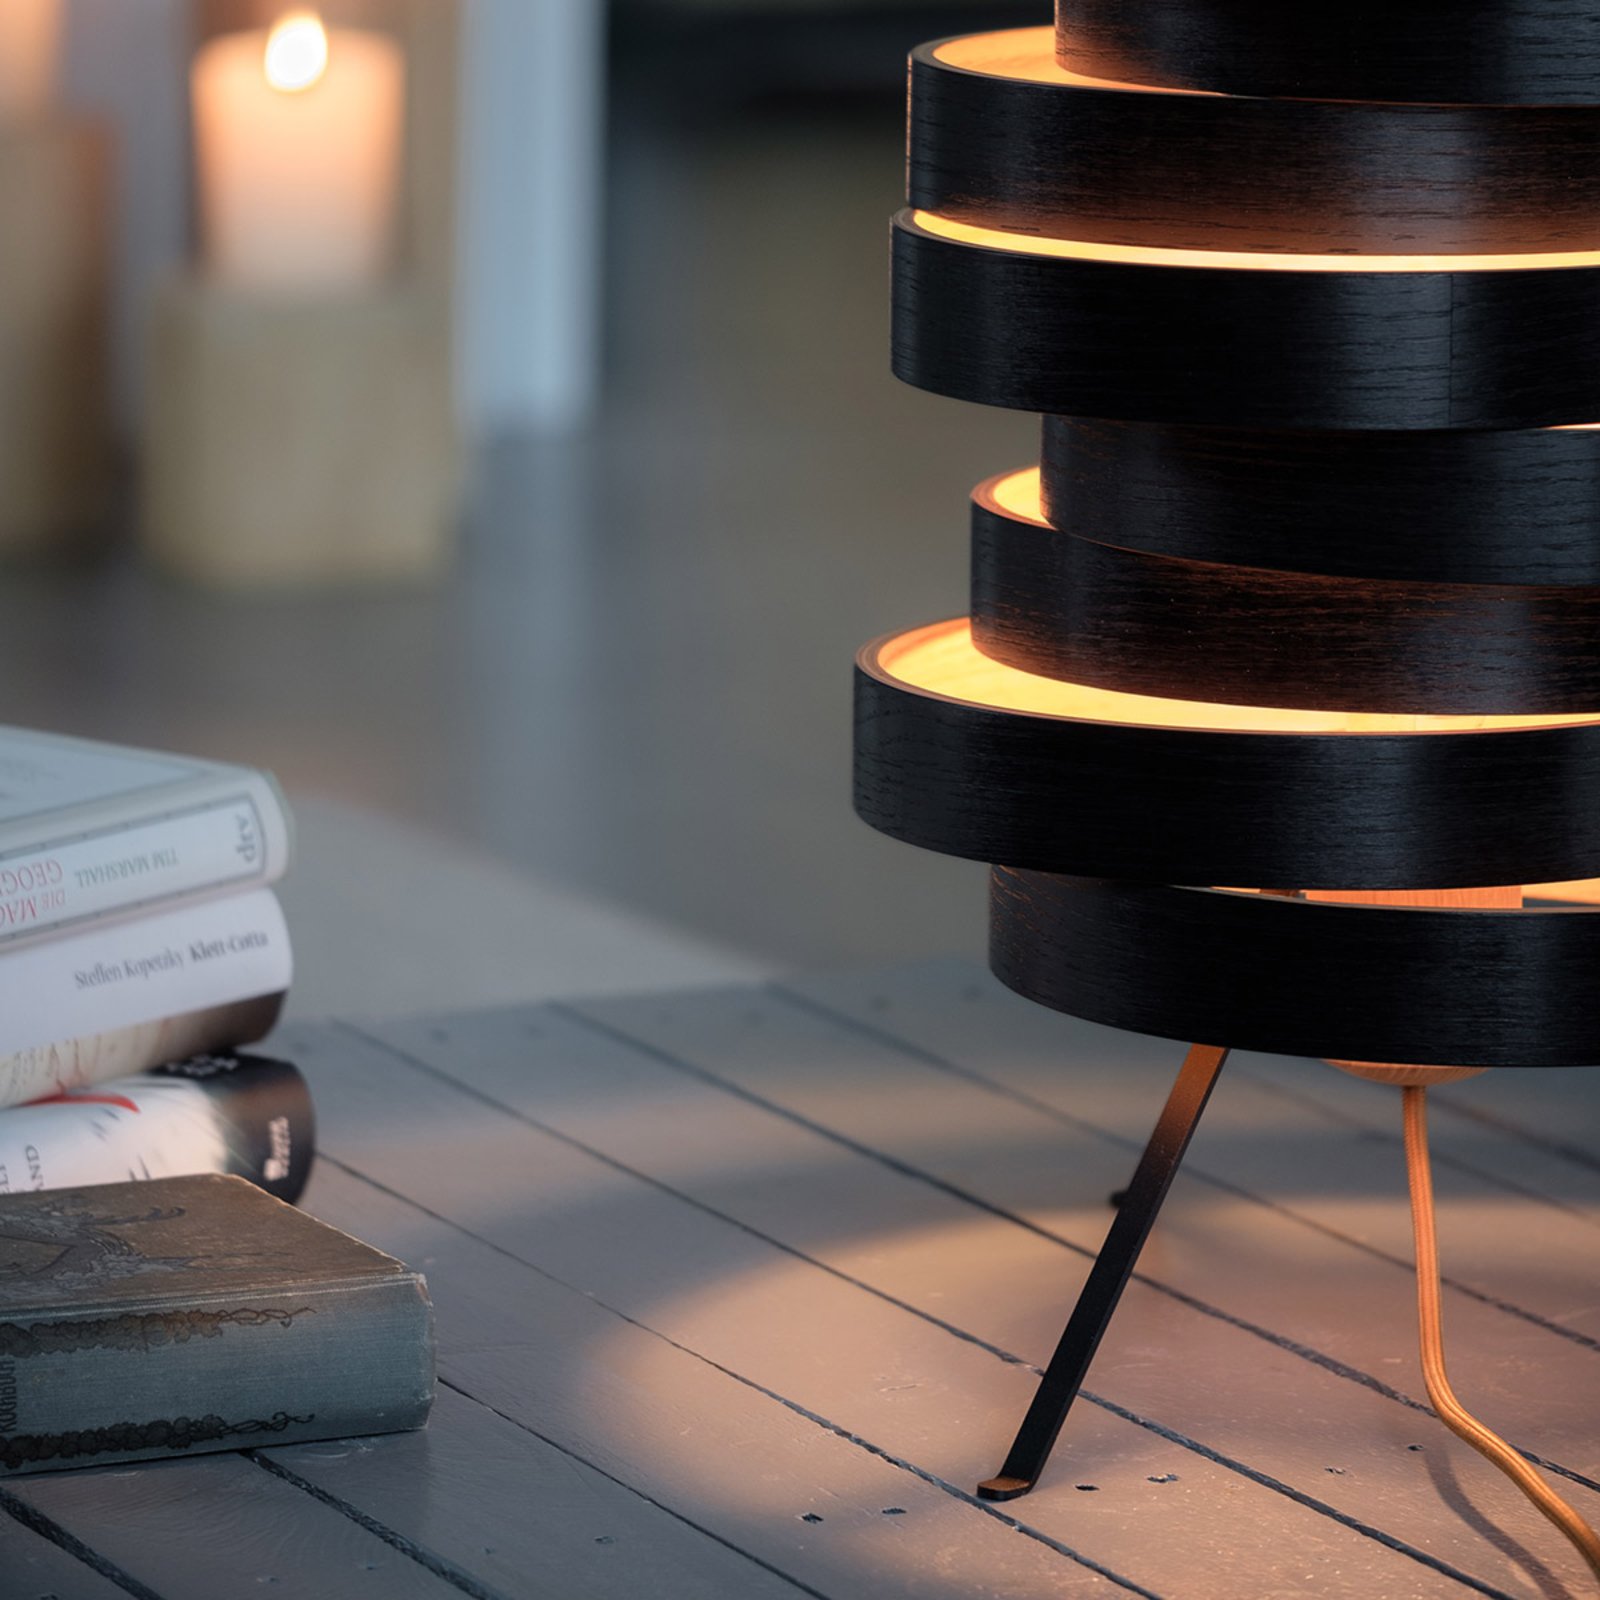 Cloq table lamp with a wooden lampshade